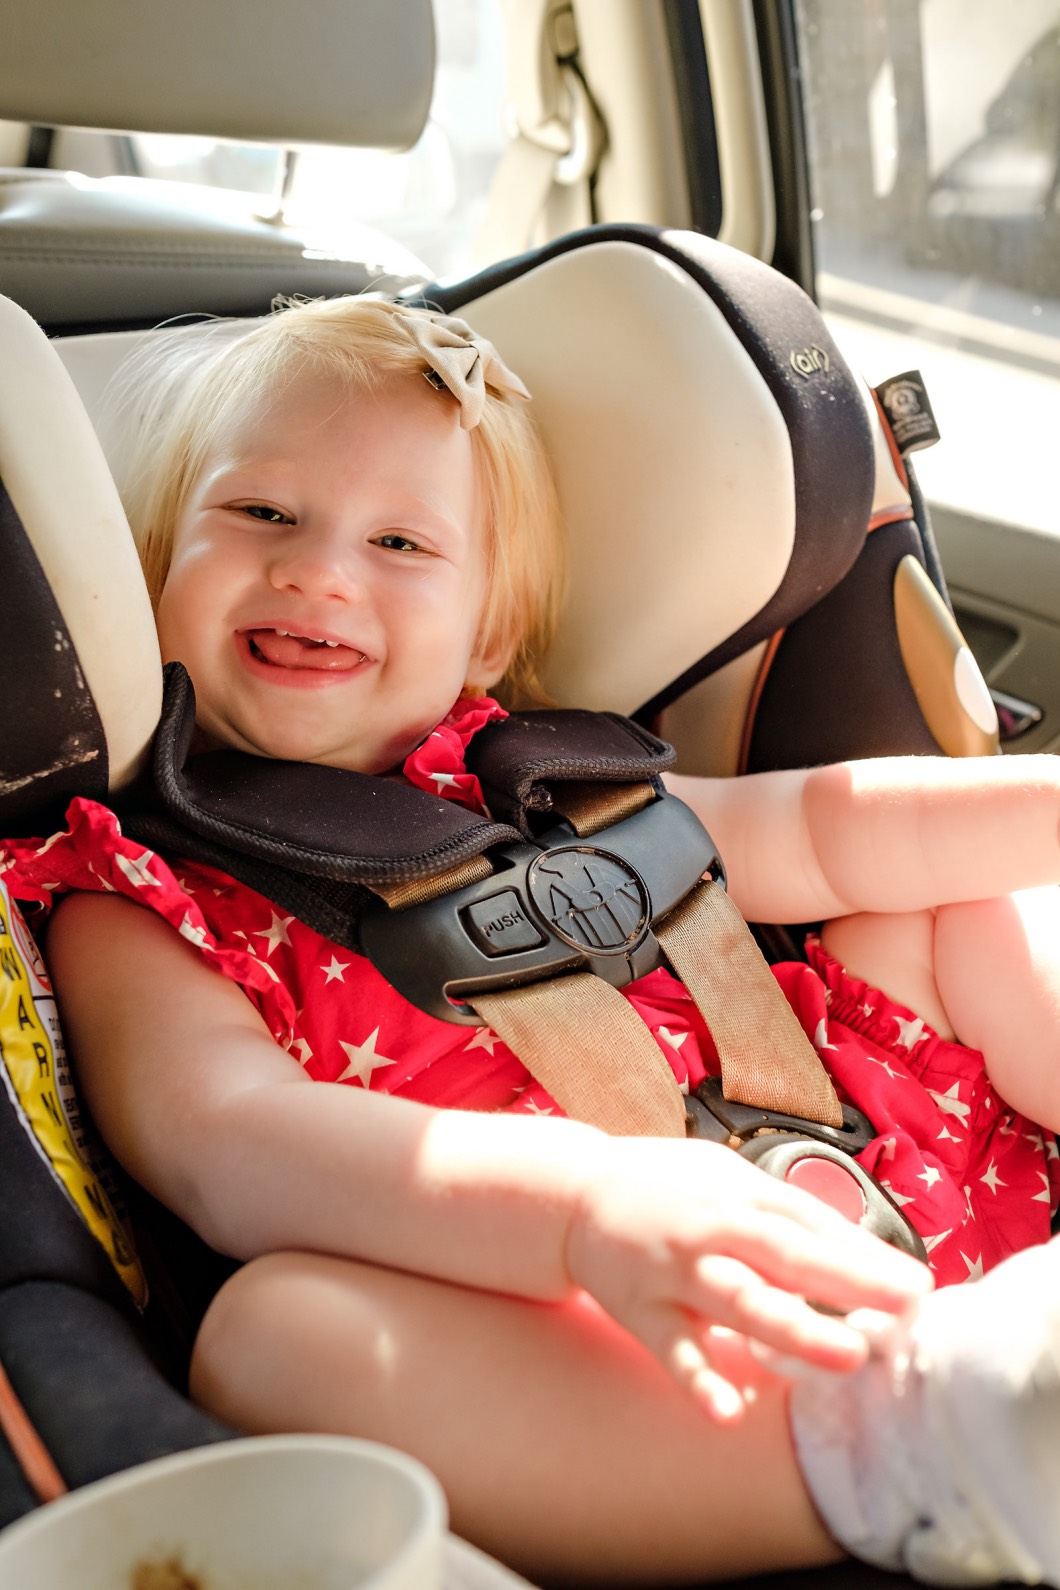 baby with fat rolls - How to Plan a Road Trip with Kids by Atlanta mom blogger Happily Hughes